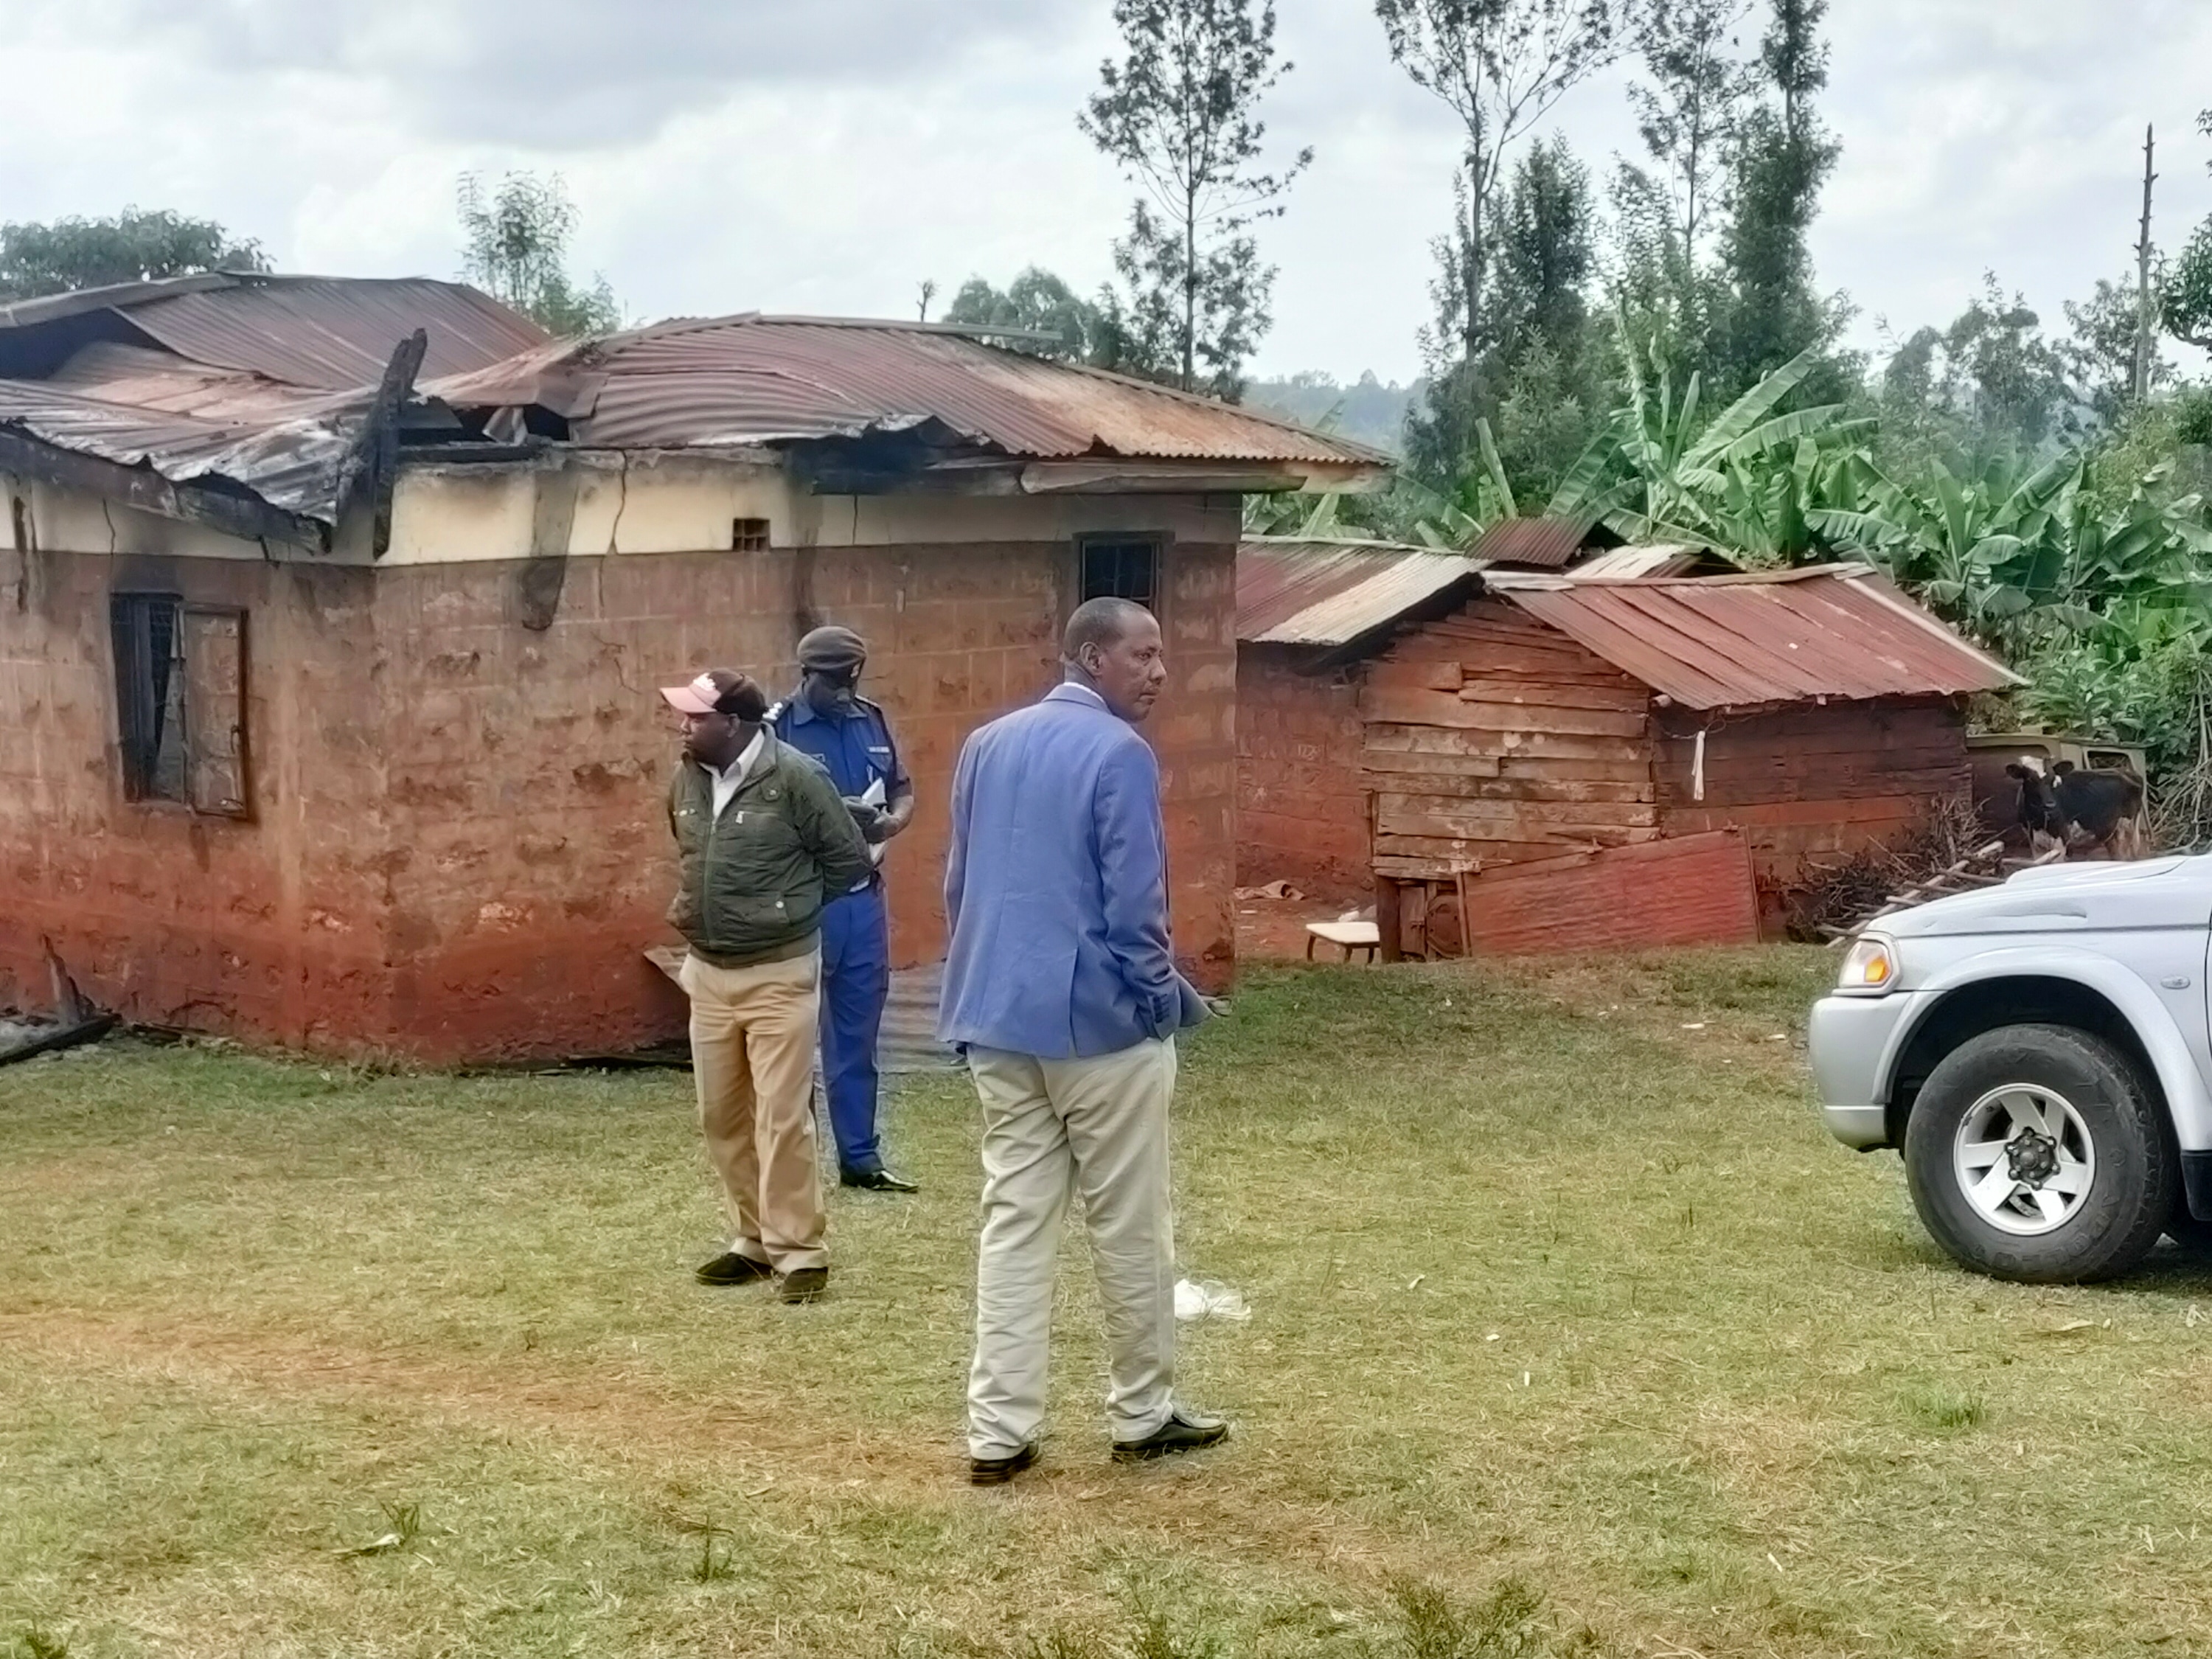 Family of six perish in overnight fire in Murang’a